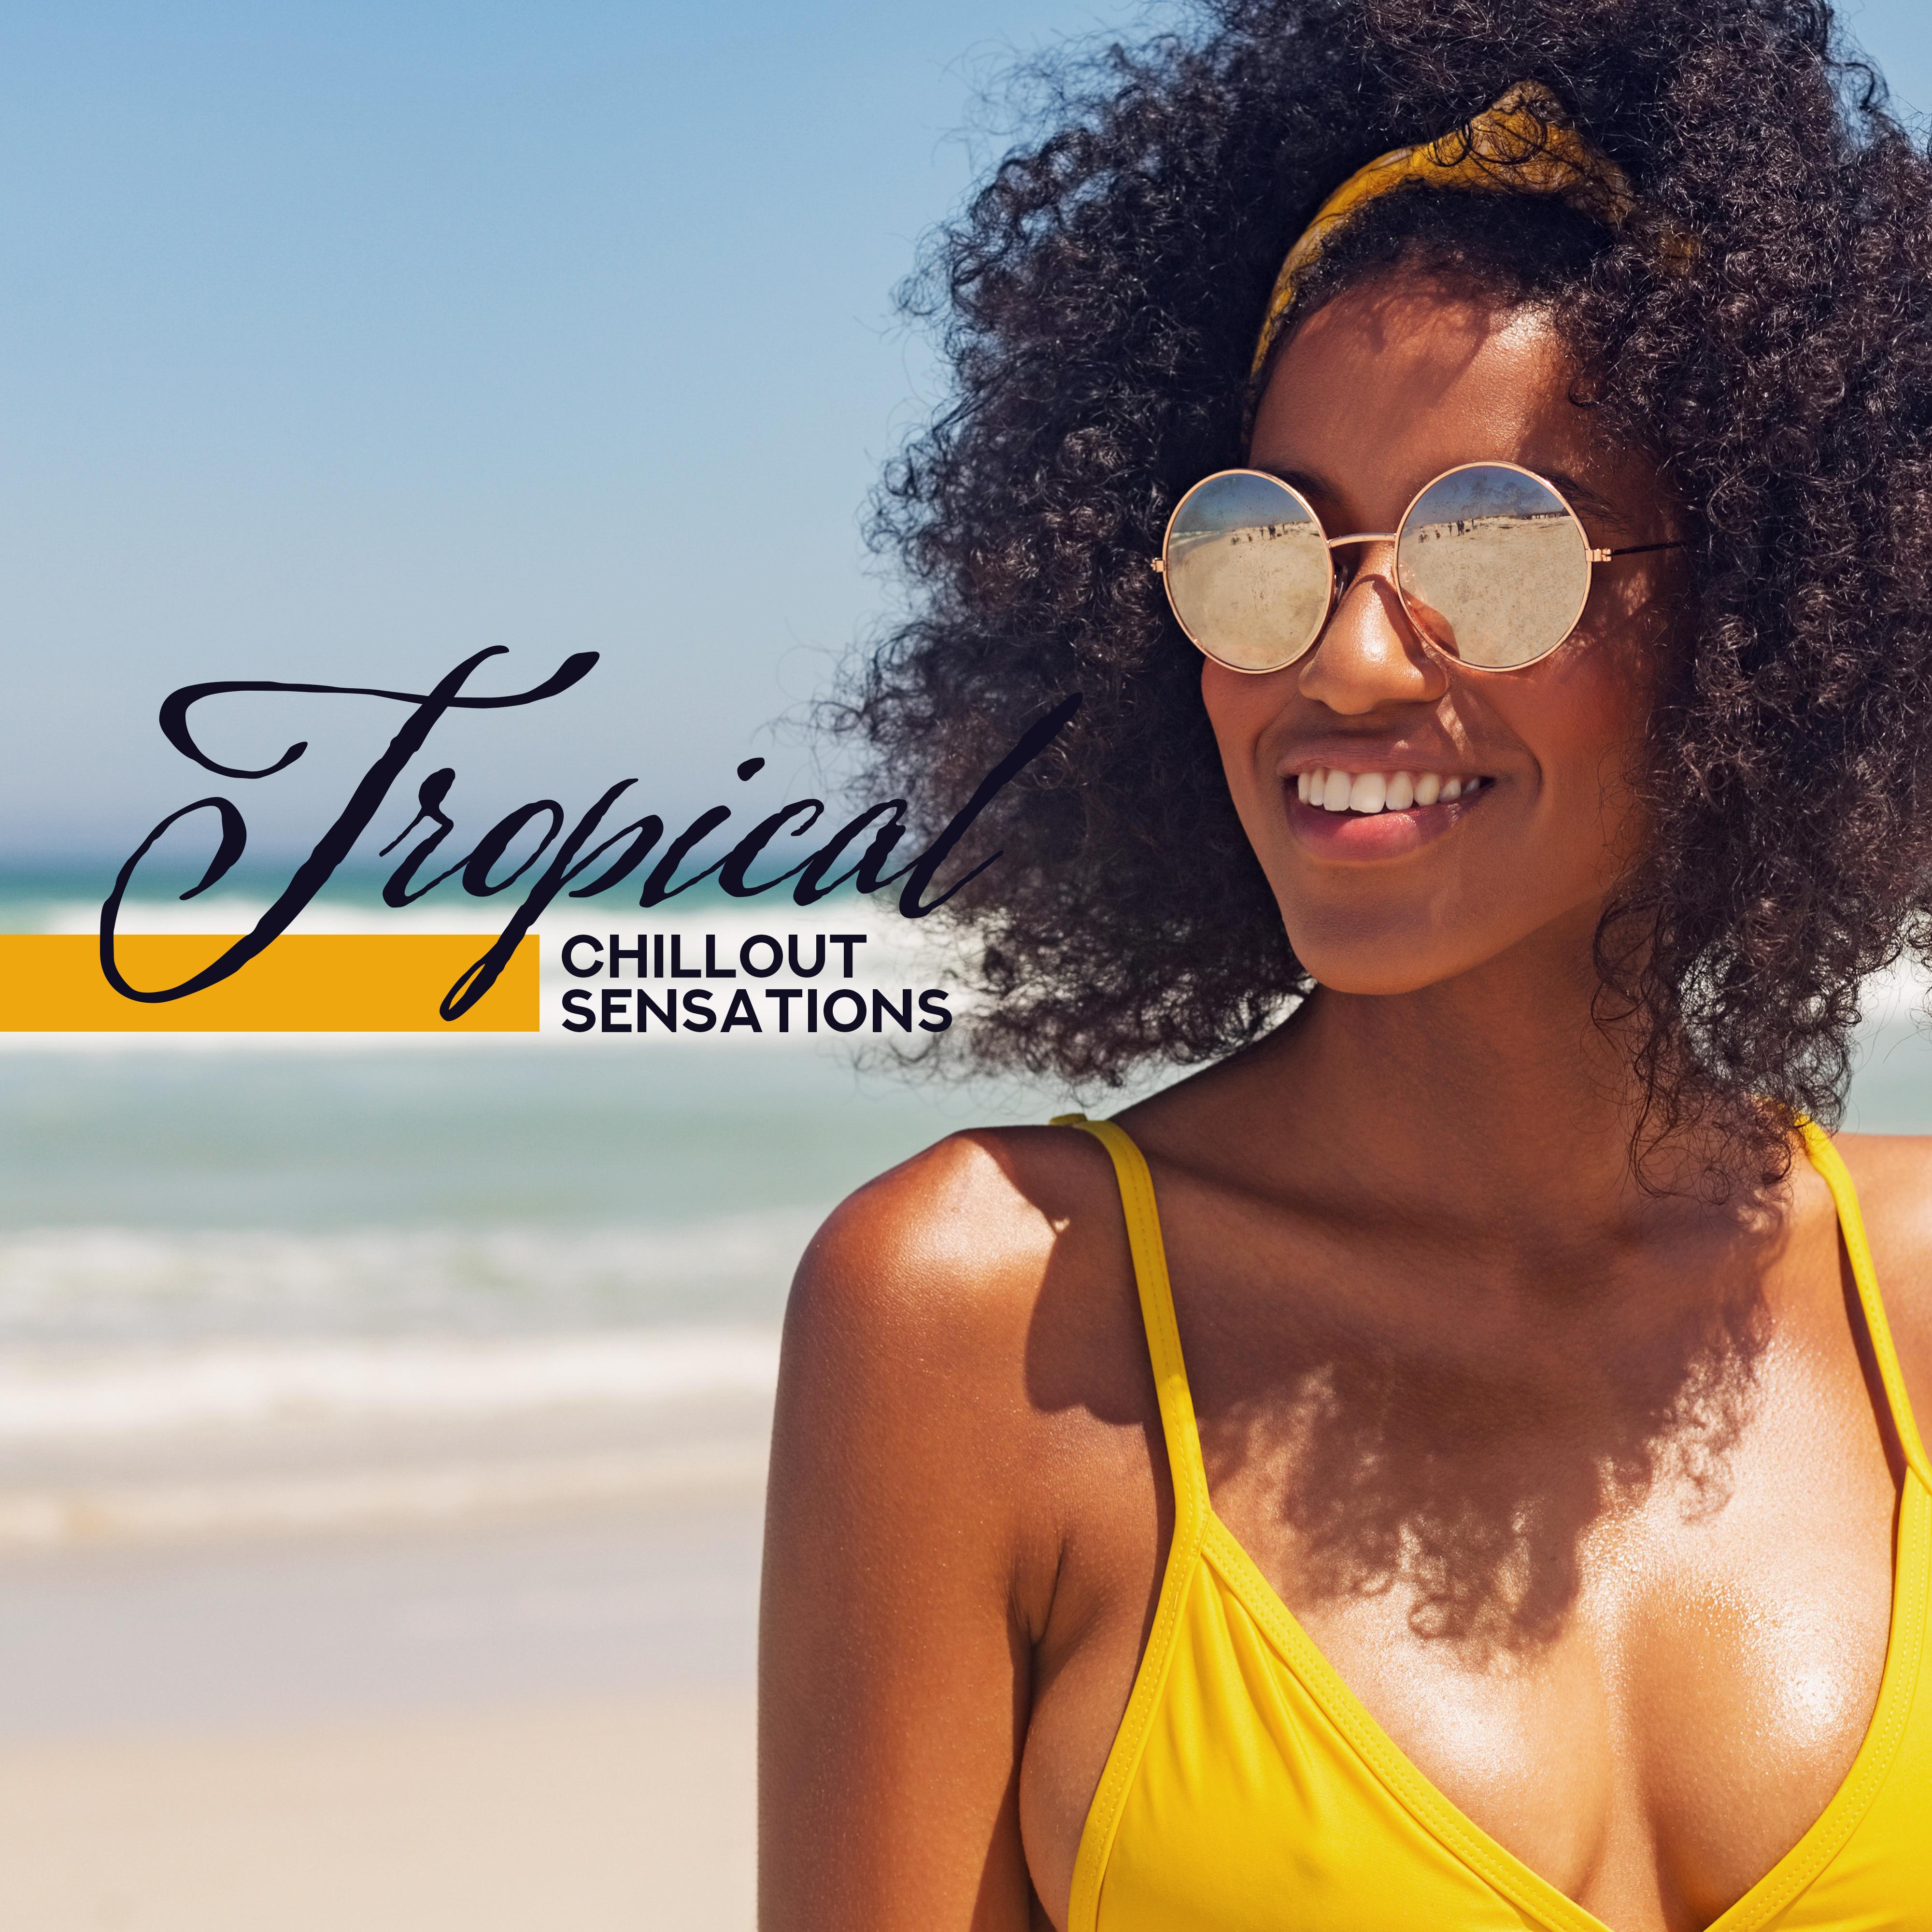 Tropical Chillout Sensations: Compilation of Best 2019 Music for Total Summer Relaxation, Most Positive Holiday Vibes, Beach Chilling Out Beats